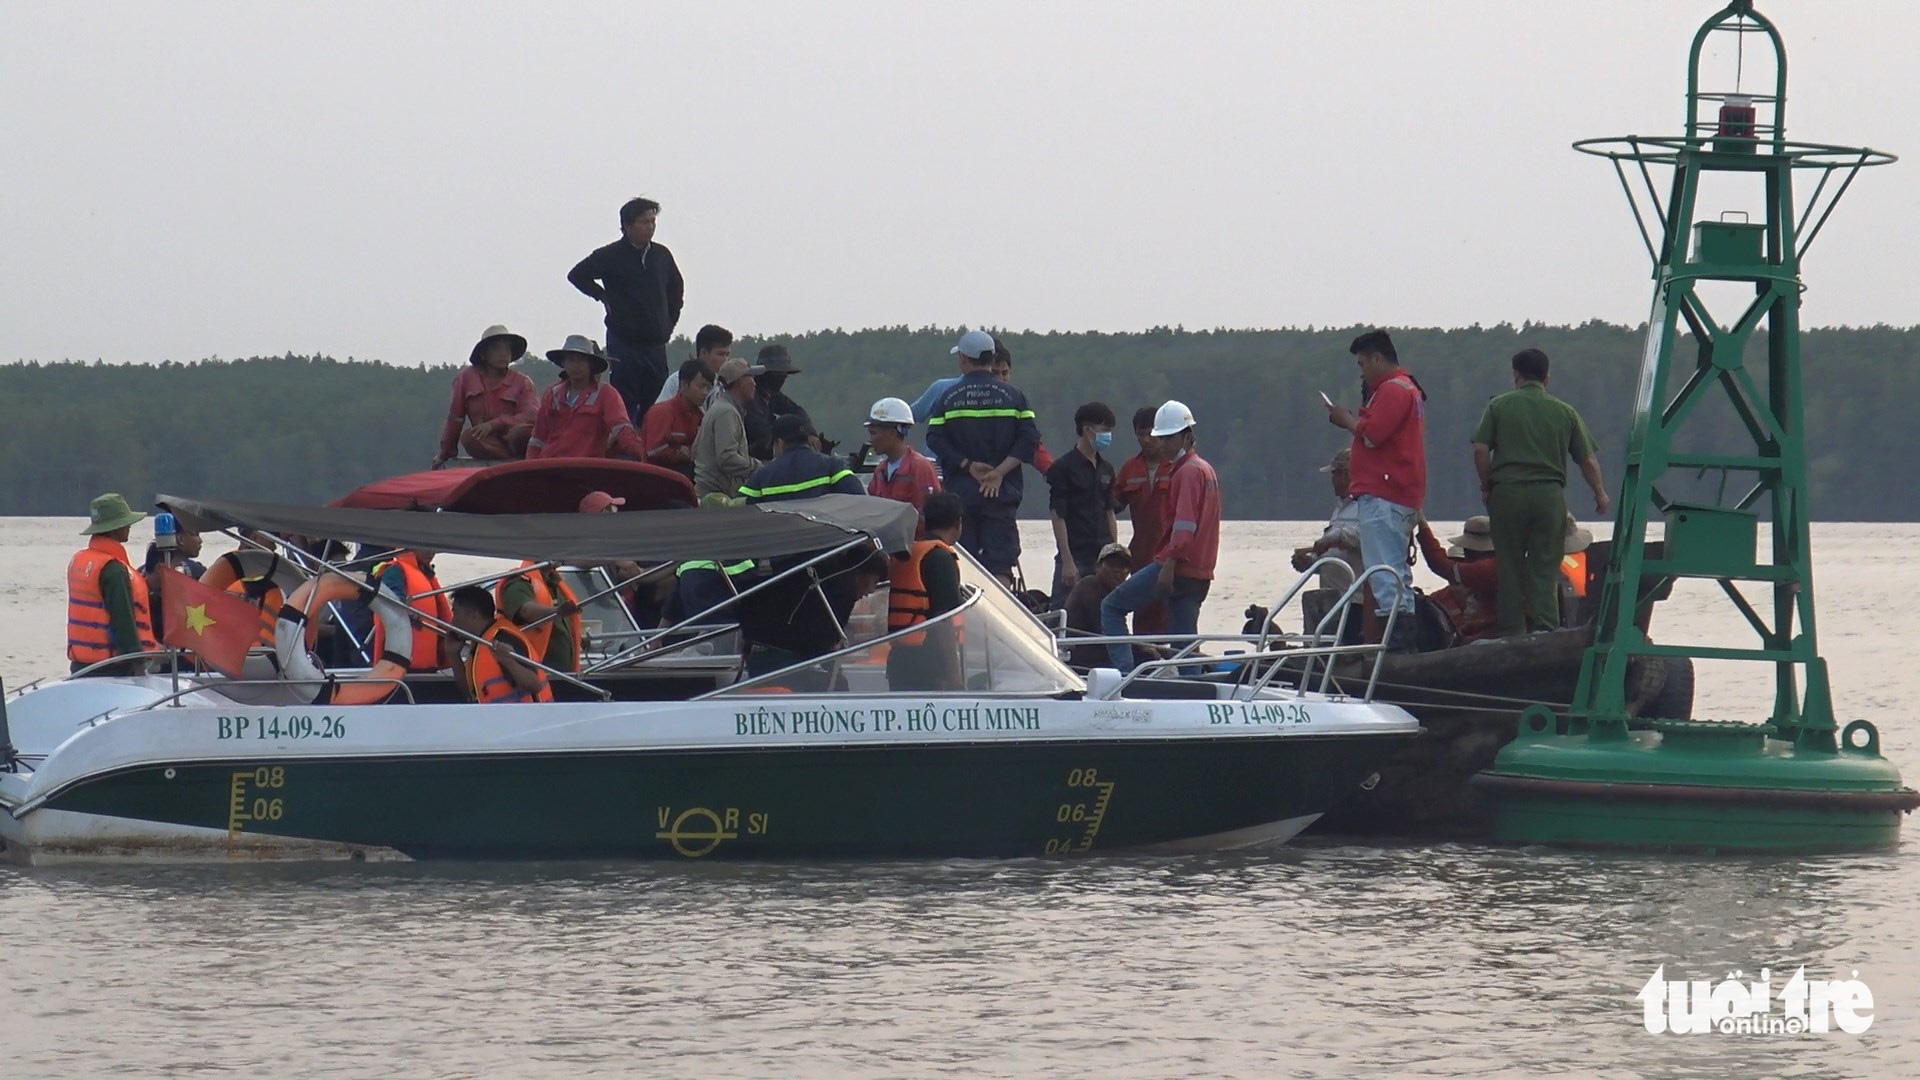 Authorities search for the victims on December 11, 2019. Photo: Minh Hoa / Tuoi Tre